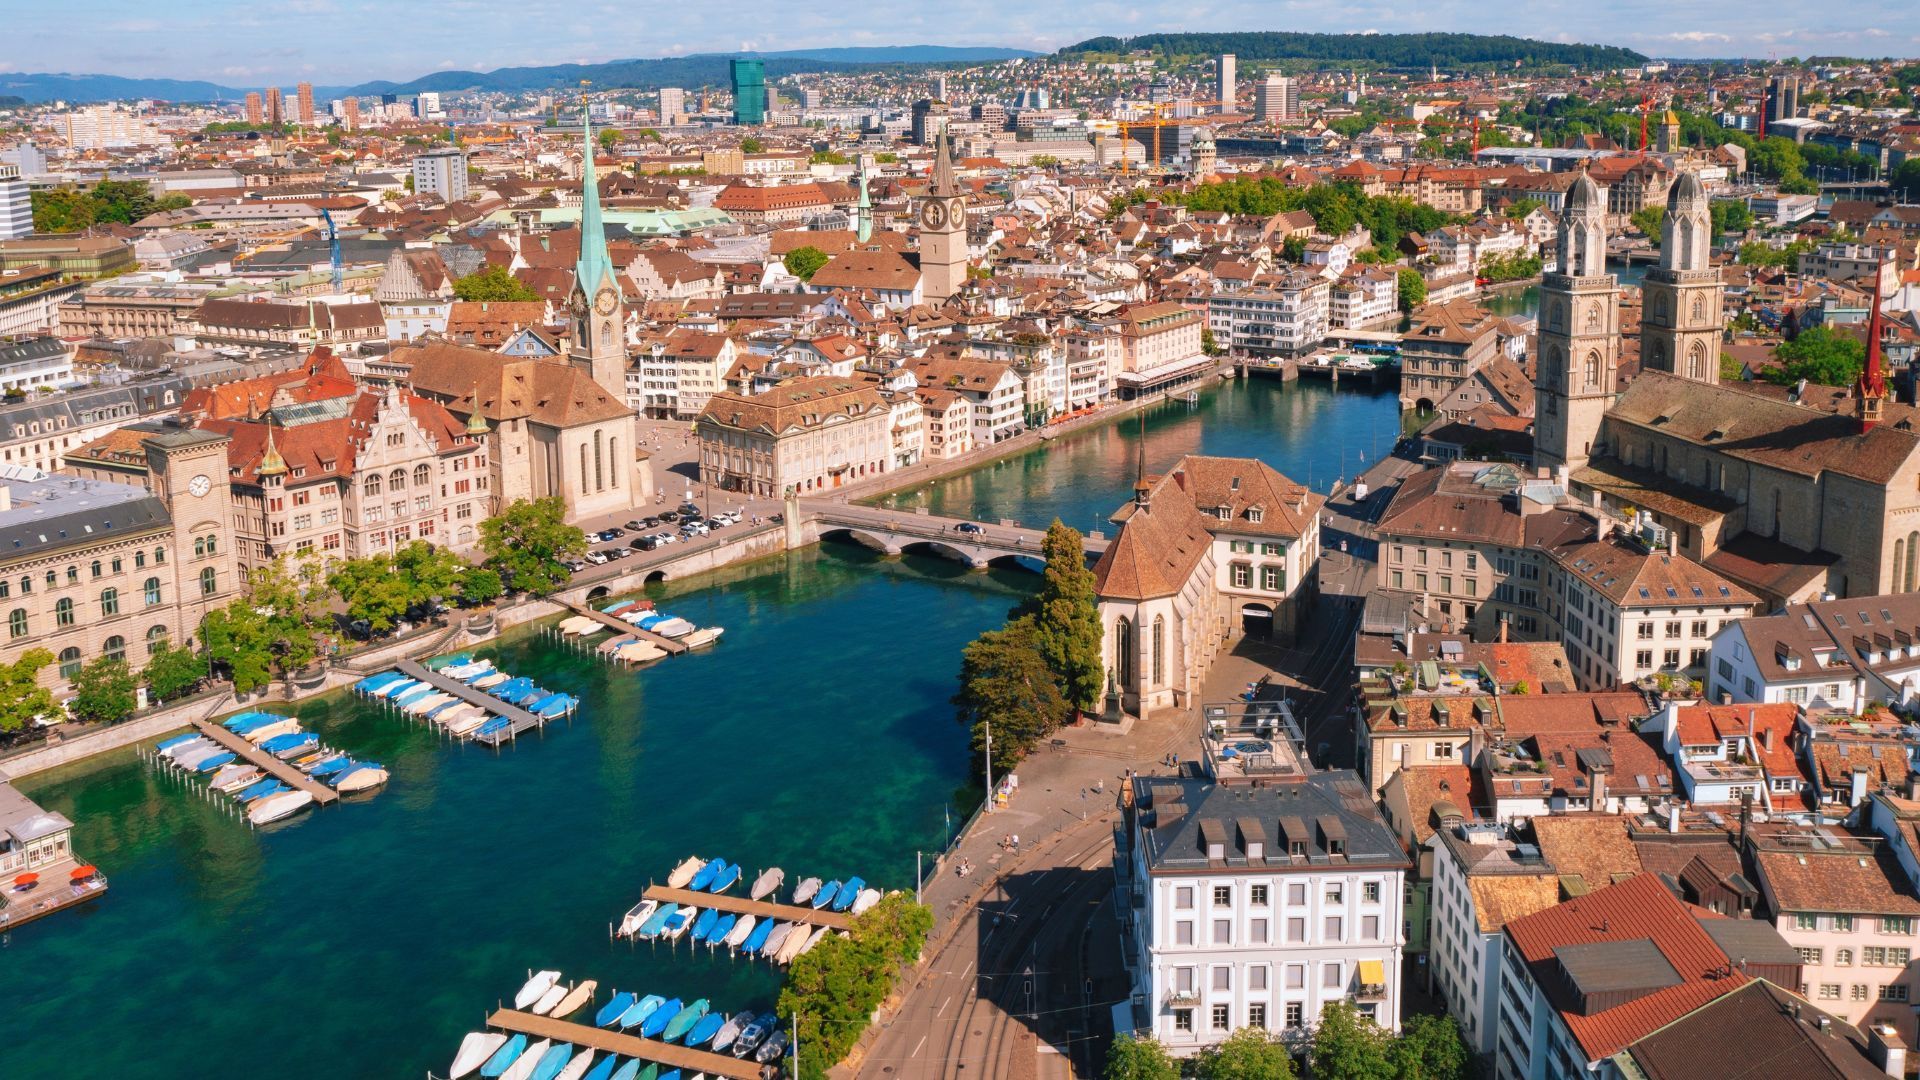 Ranking for the fourth time, Zurich. in Switzerland has been the smartest city in the world, doing particularly well for public transport, basic sanitation, education, and public safety. (Source: Shutterstock)